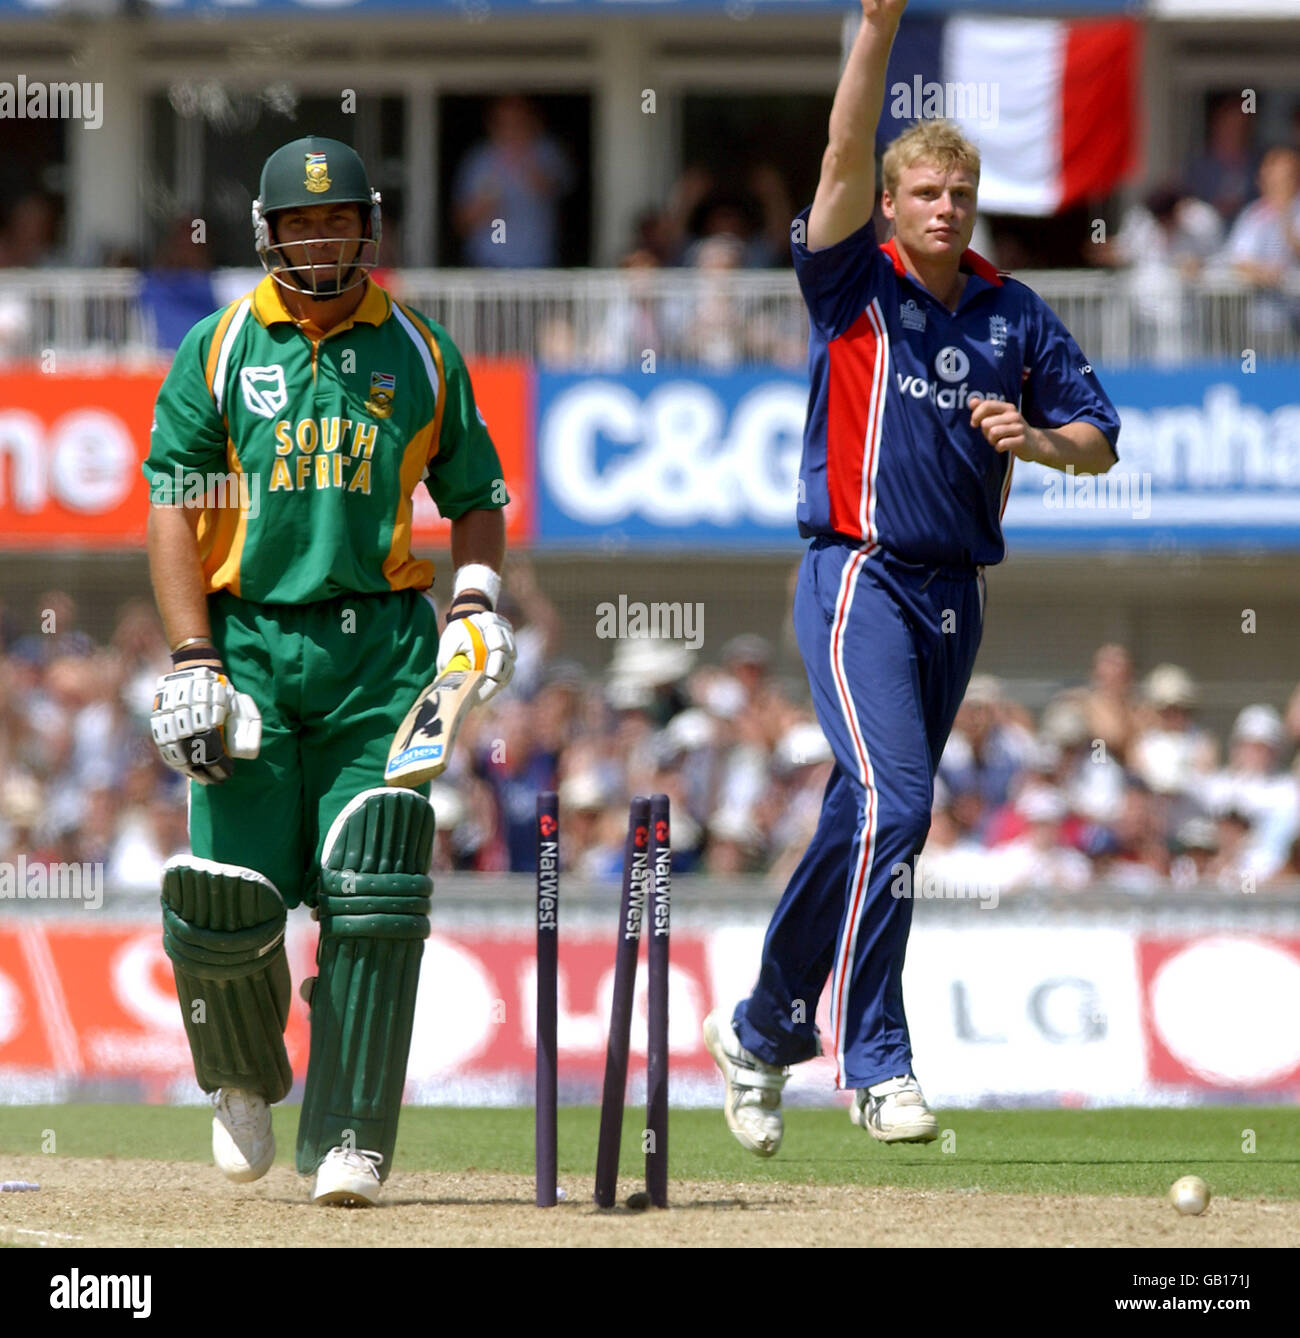 Cricket - England v South Africa - One Day NatWest Series - The Oval Stock Photo